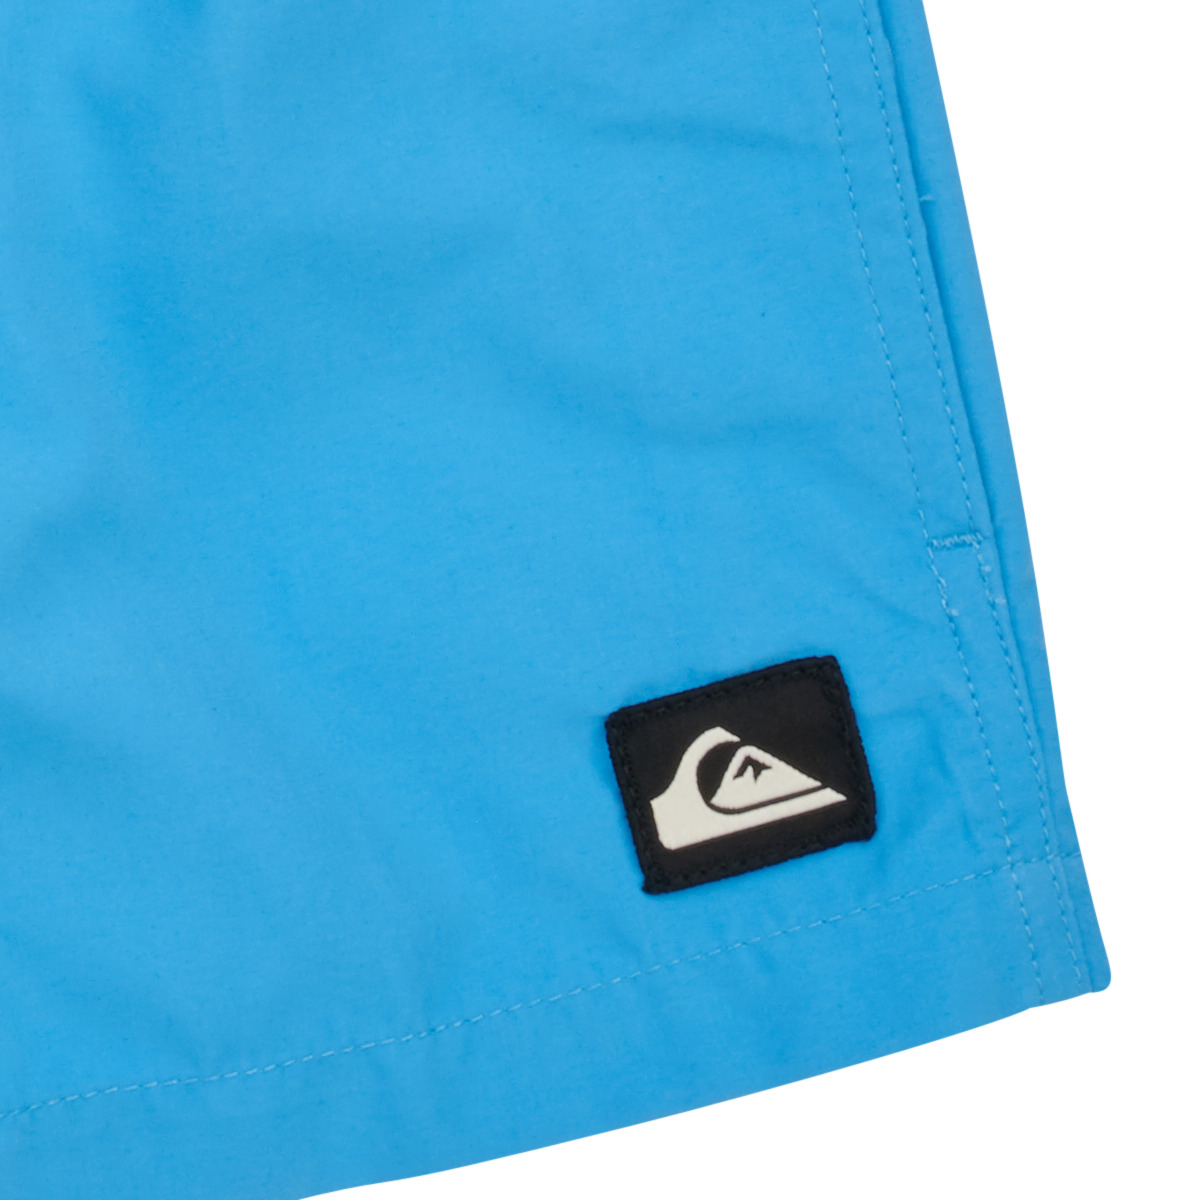 Quiksilver Bleu EVERYDAY VOLLEY YOUTH 13 k4dDBx4s